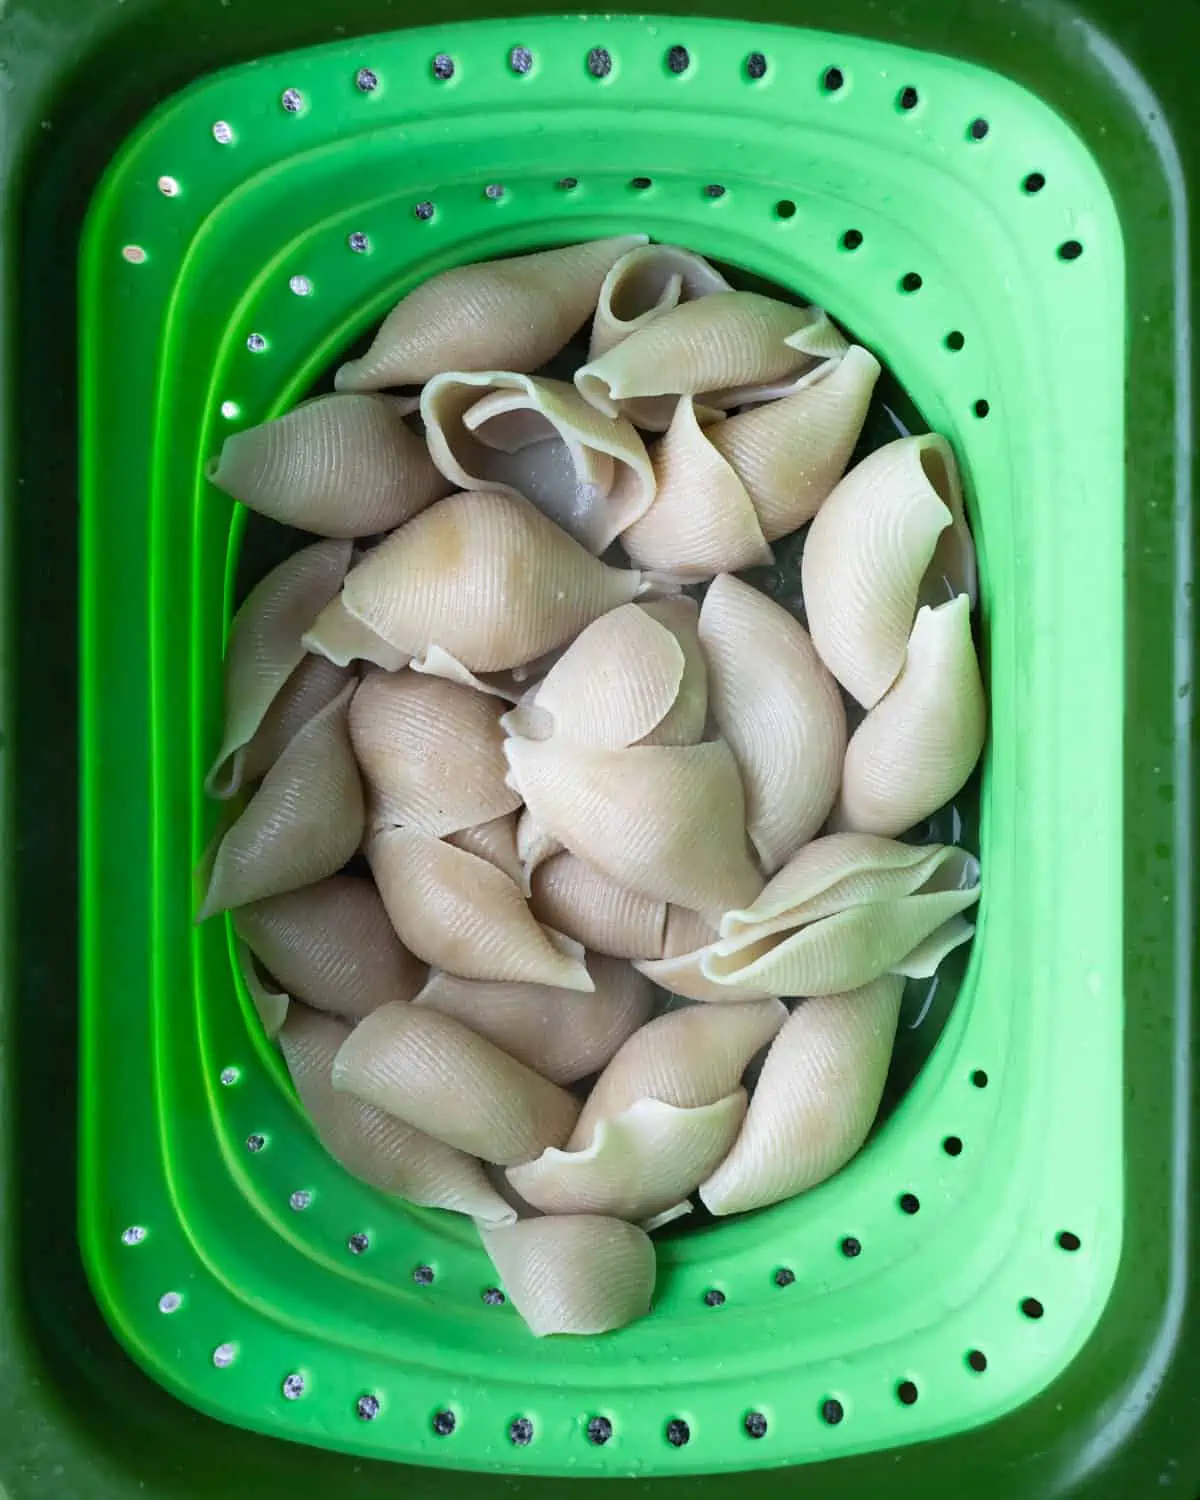 Top-down view of a pasta strainer with gluten-free pasta shells inside